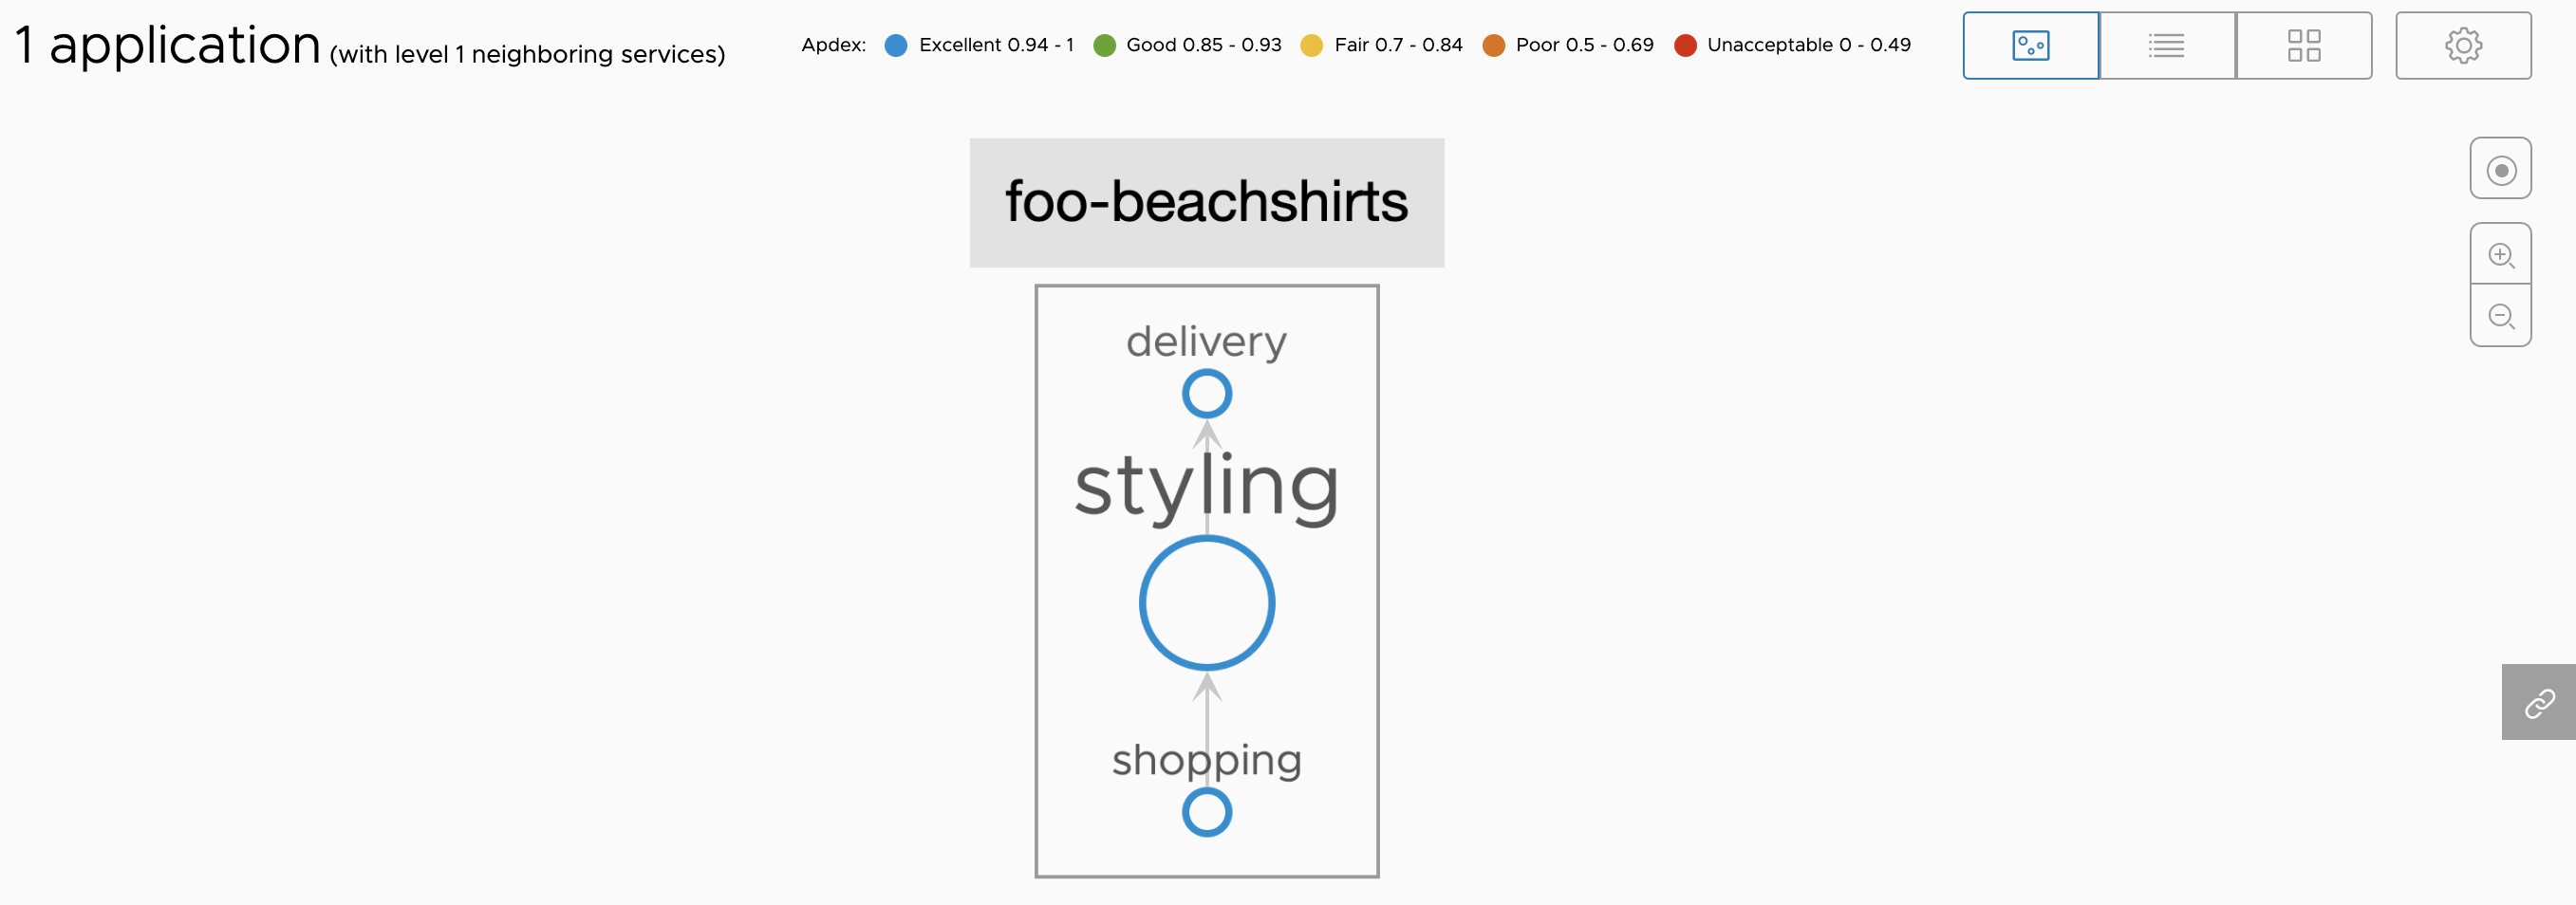 The screenshots shows the foo-beachshirts application on the app map view.